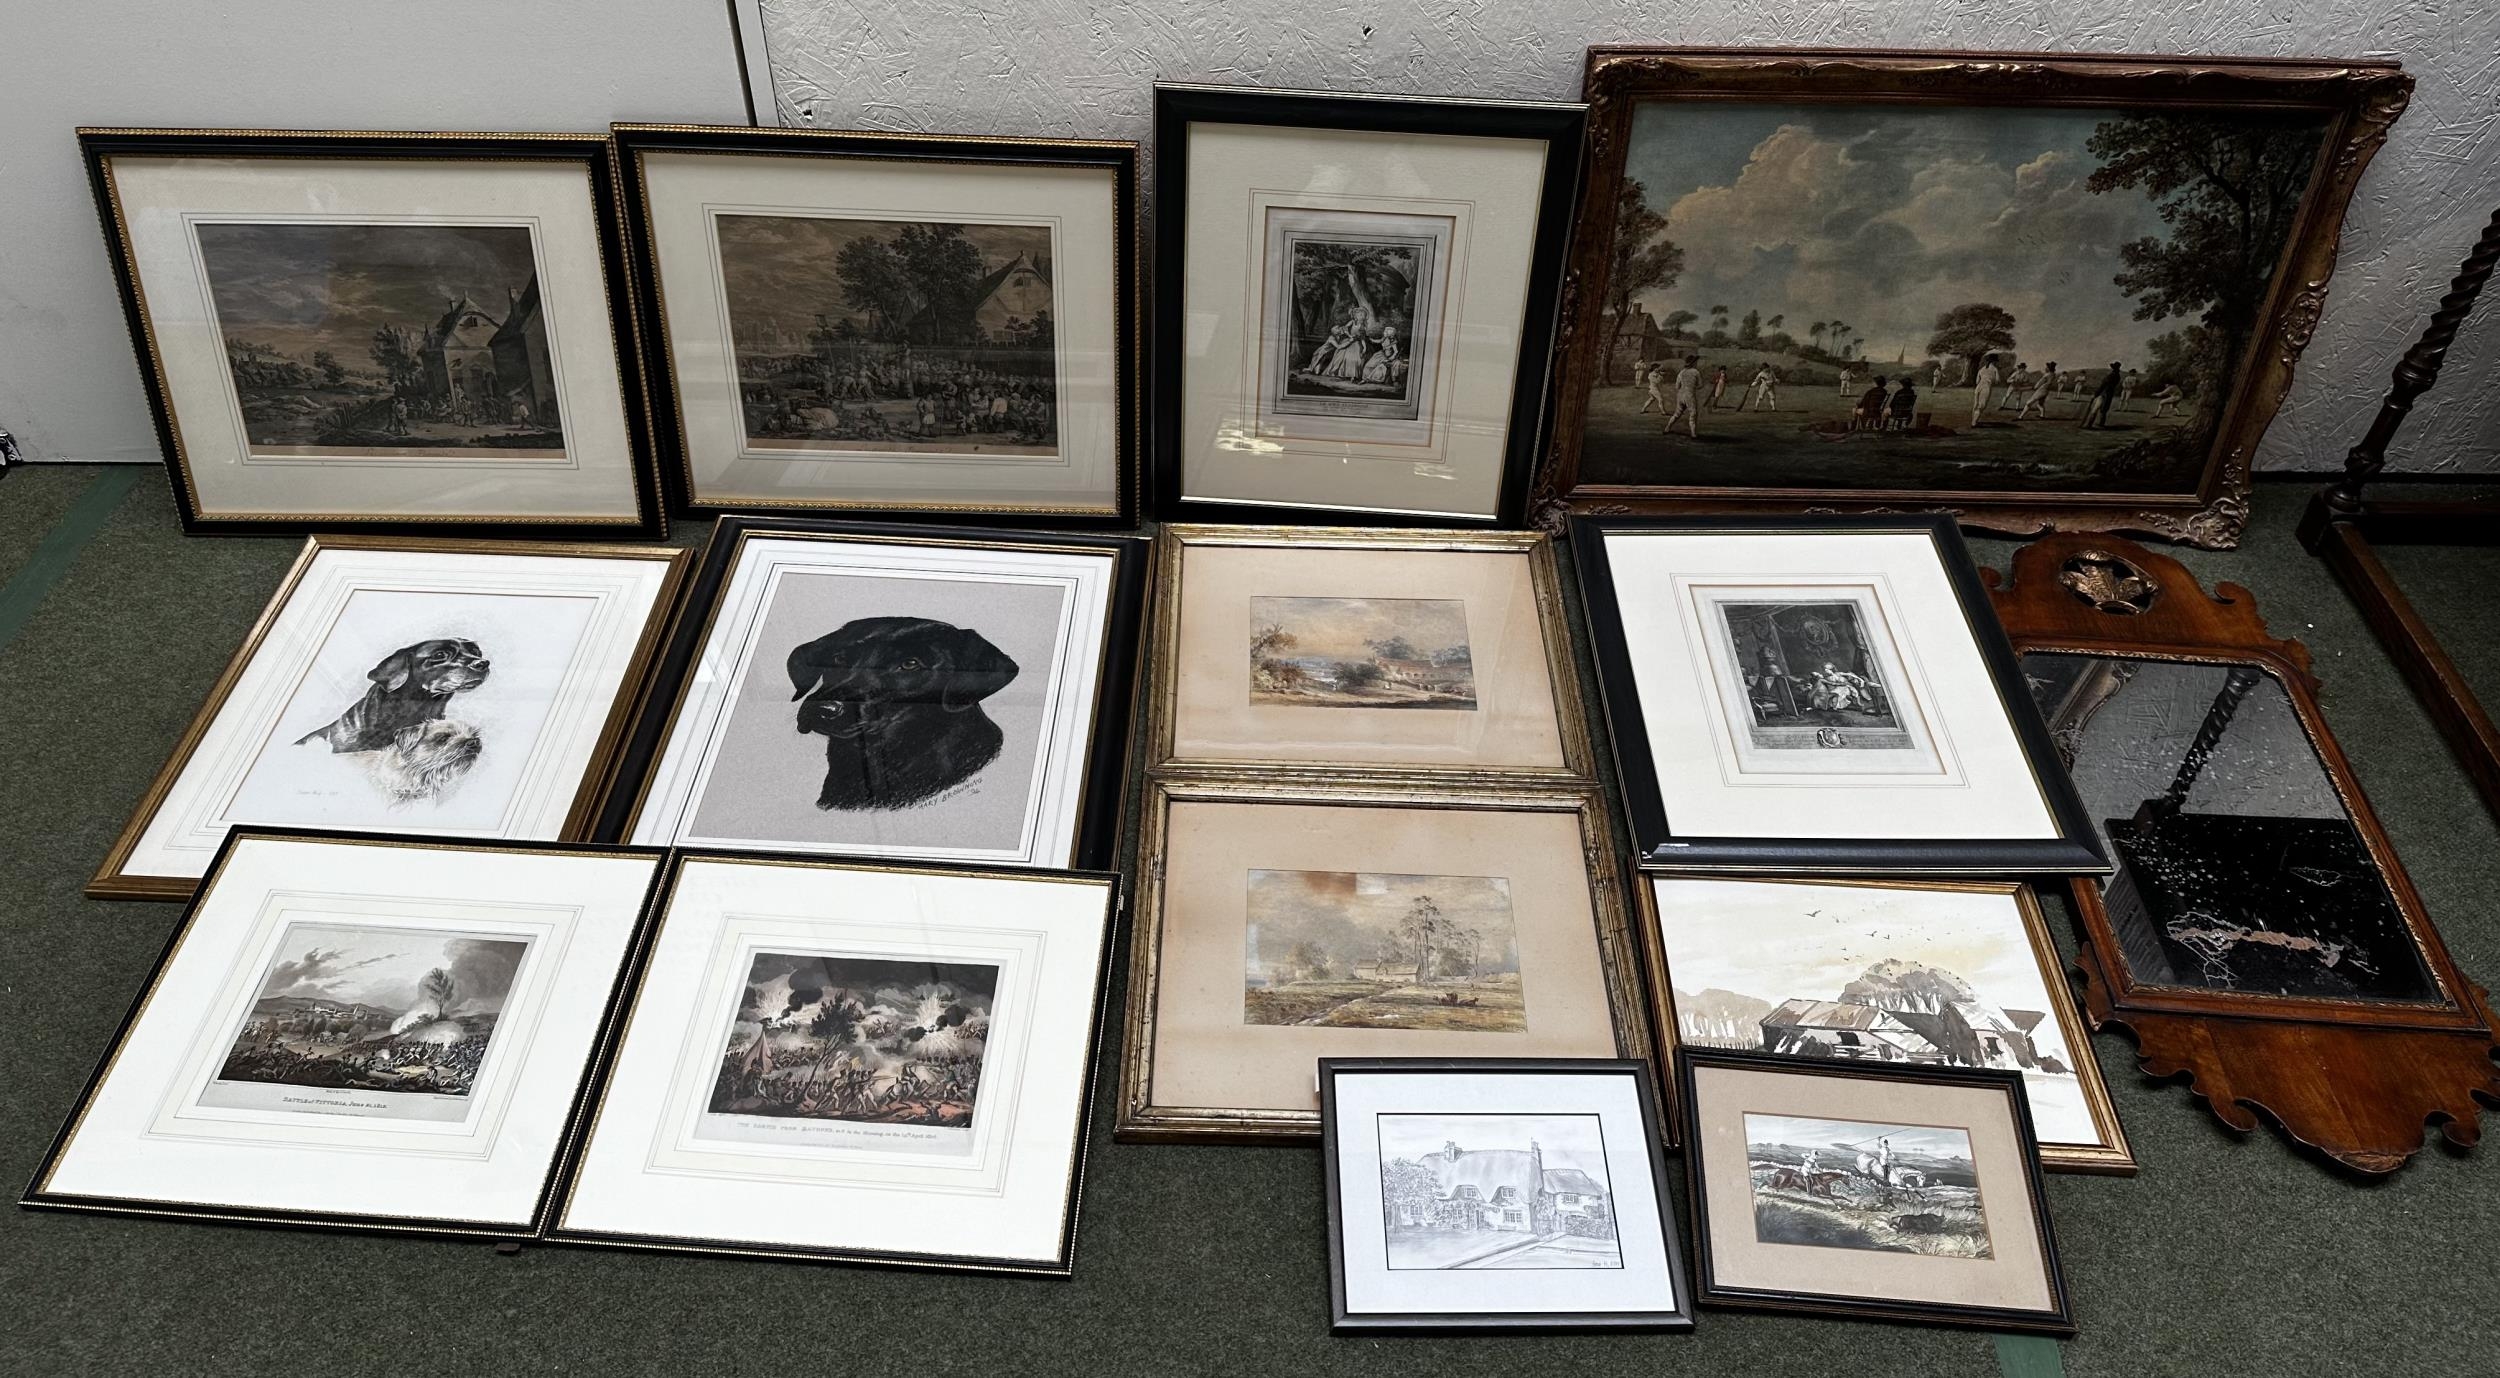 A large collection of decorative framed pictures and prints, see images, some with damage; and a